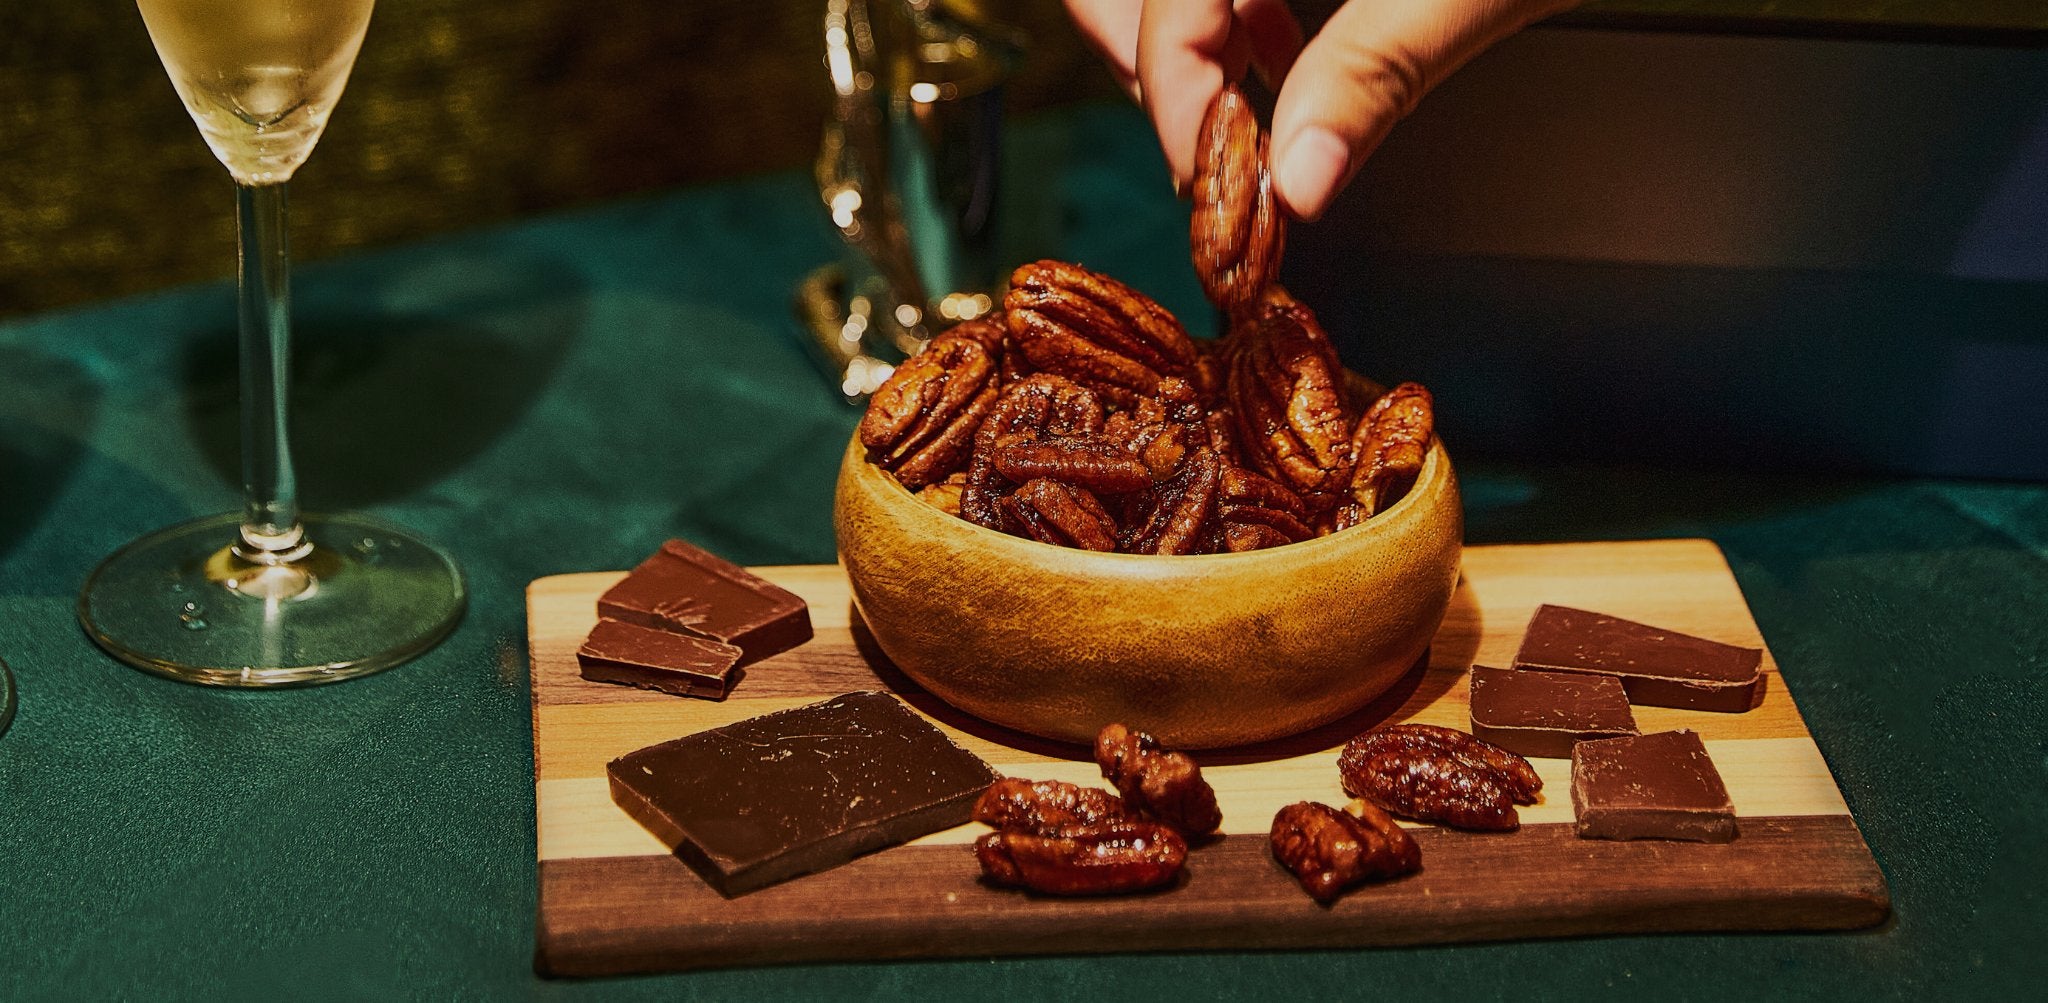 pecans and chocolate in a wooden bowl